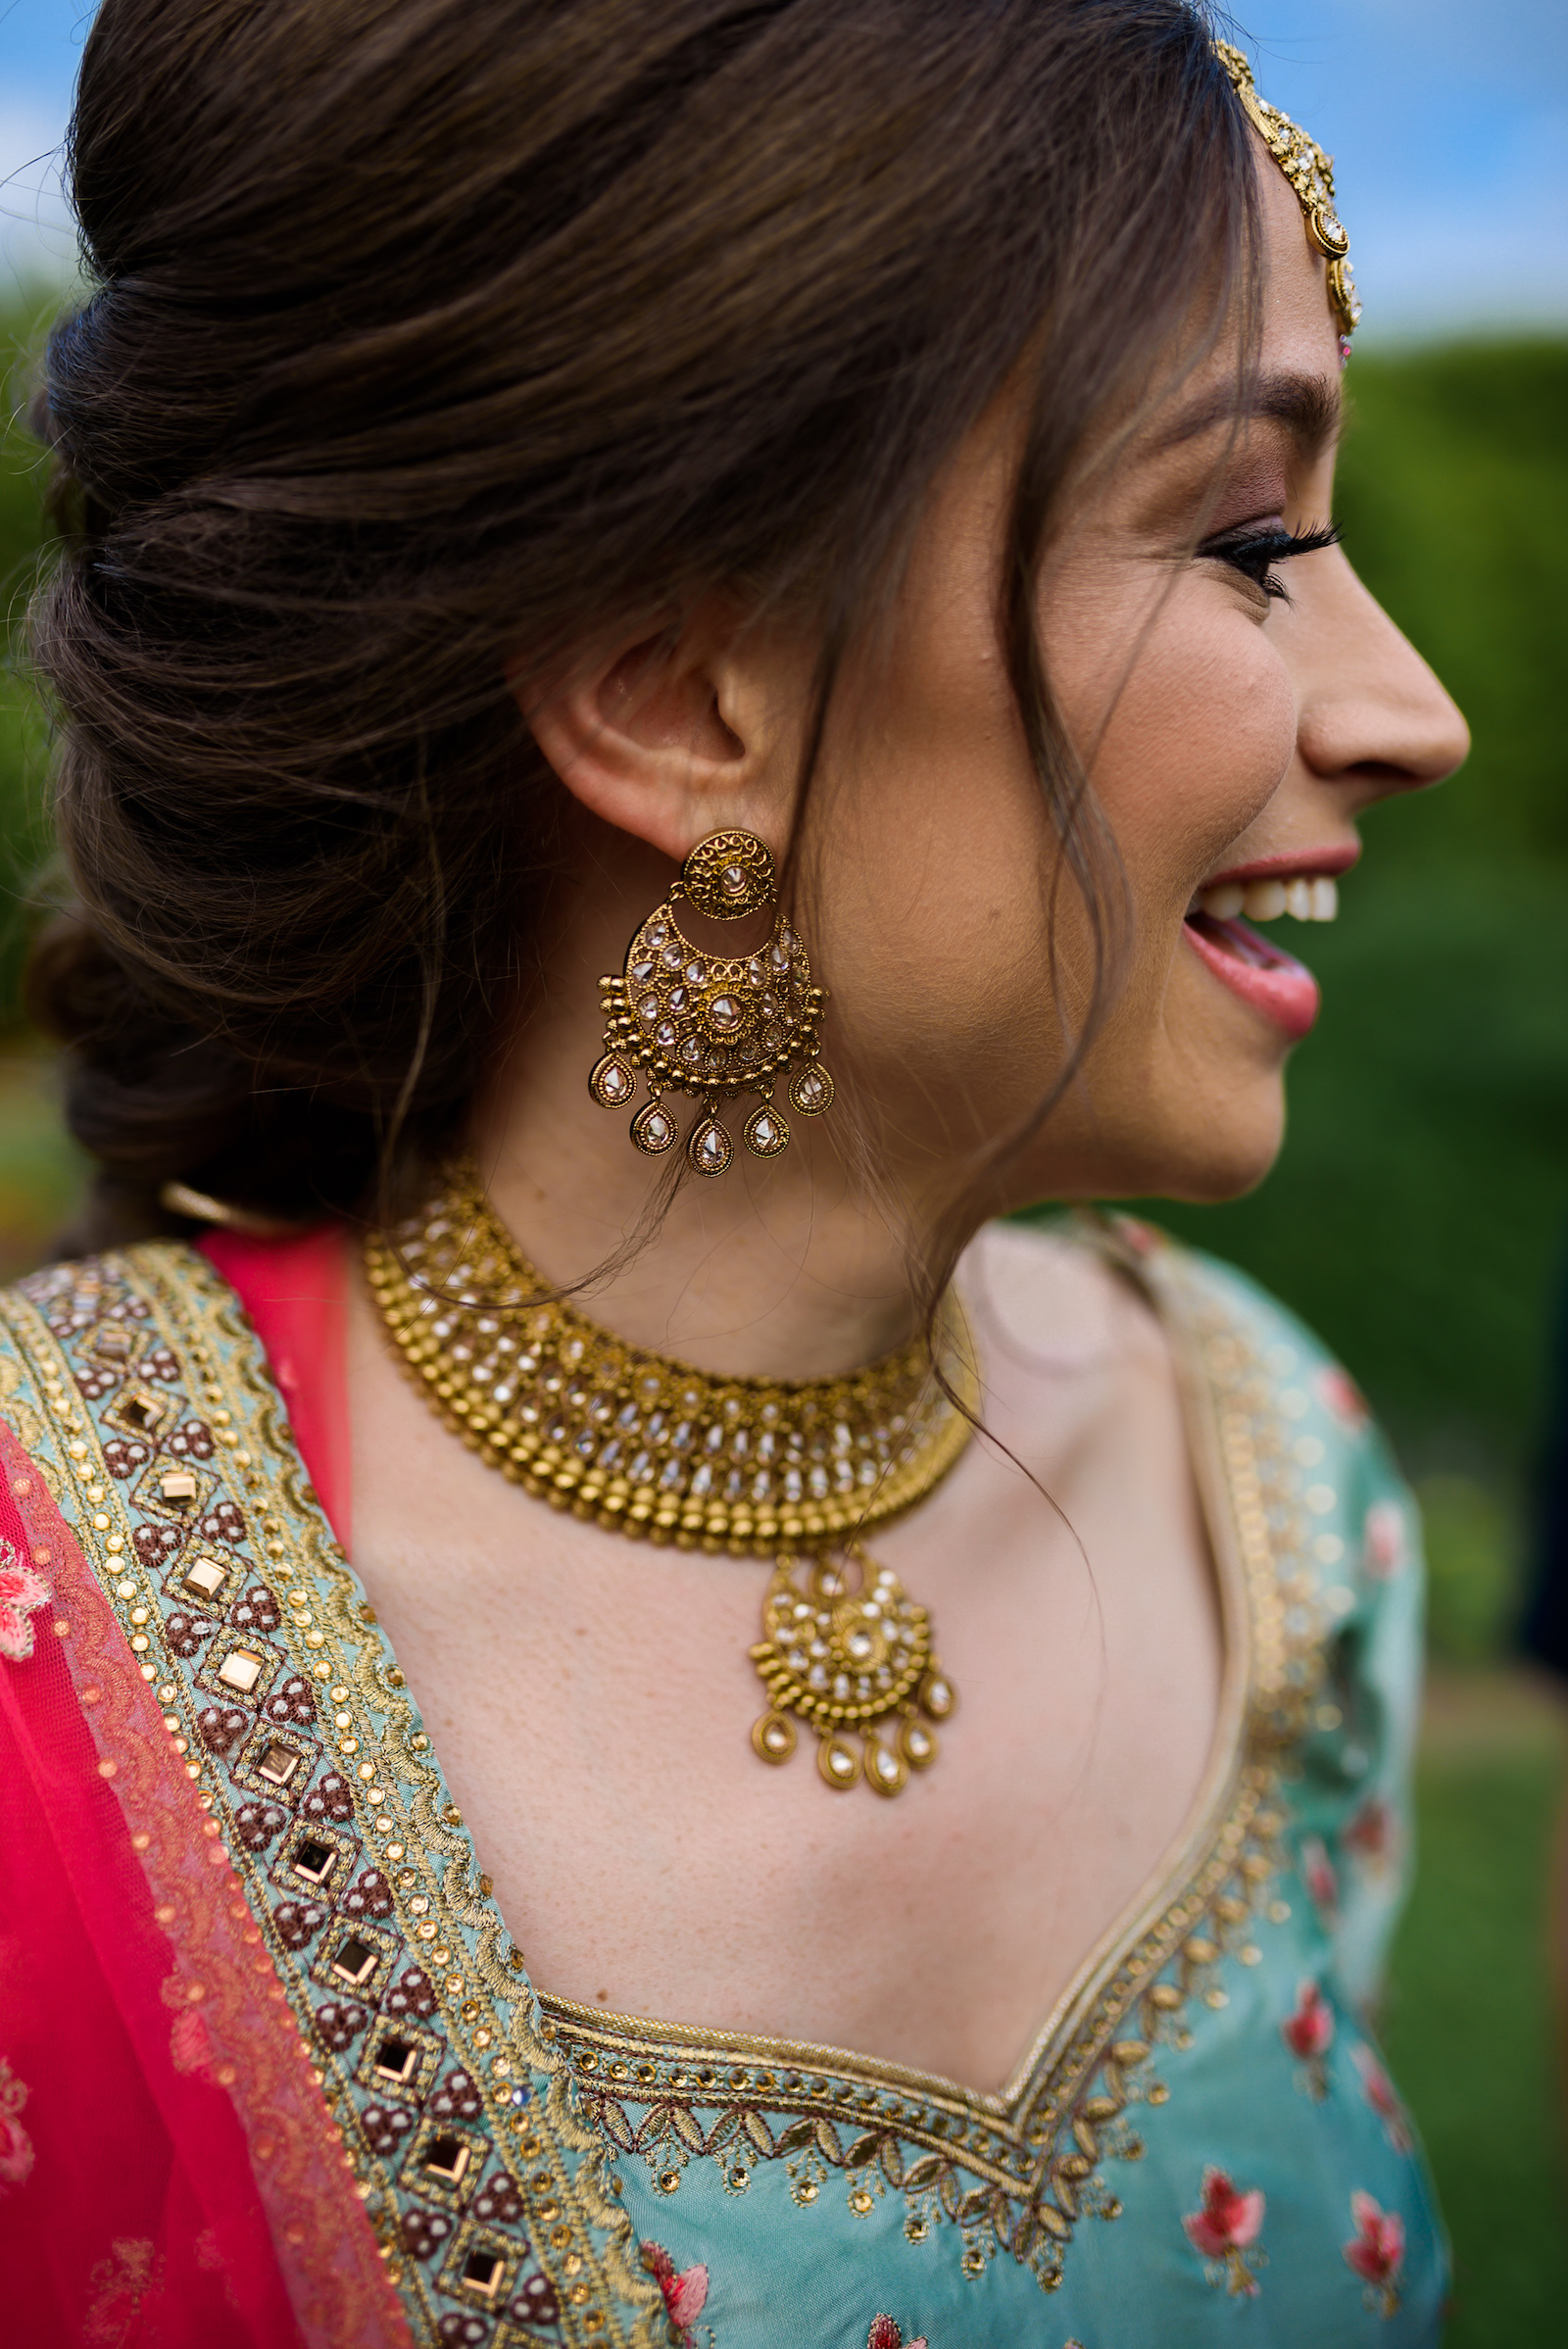 Charming Indian Wedding featured on NBG blog!